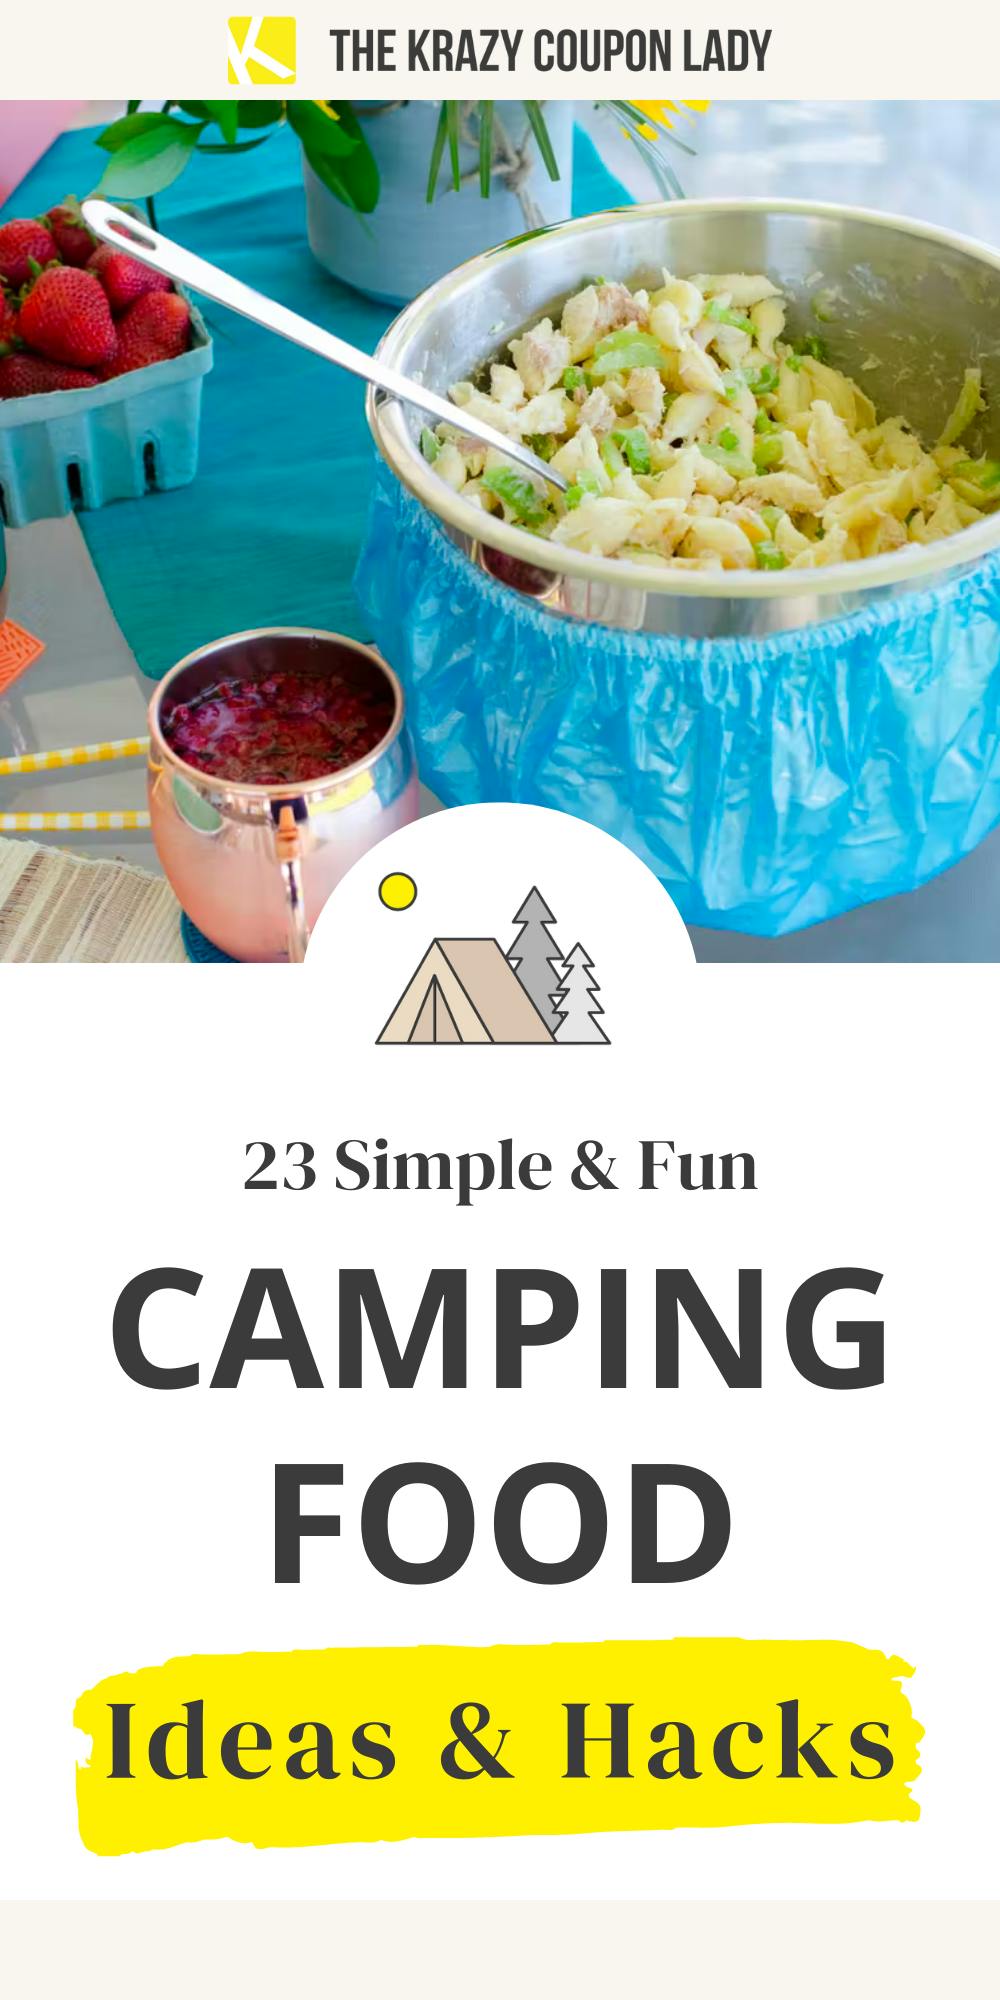 23 Easy Camping Food Ideas & Hacks for Your Next Adventure